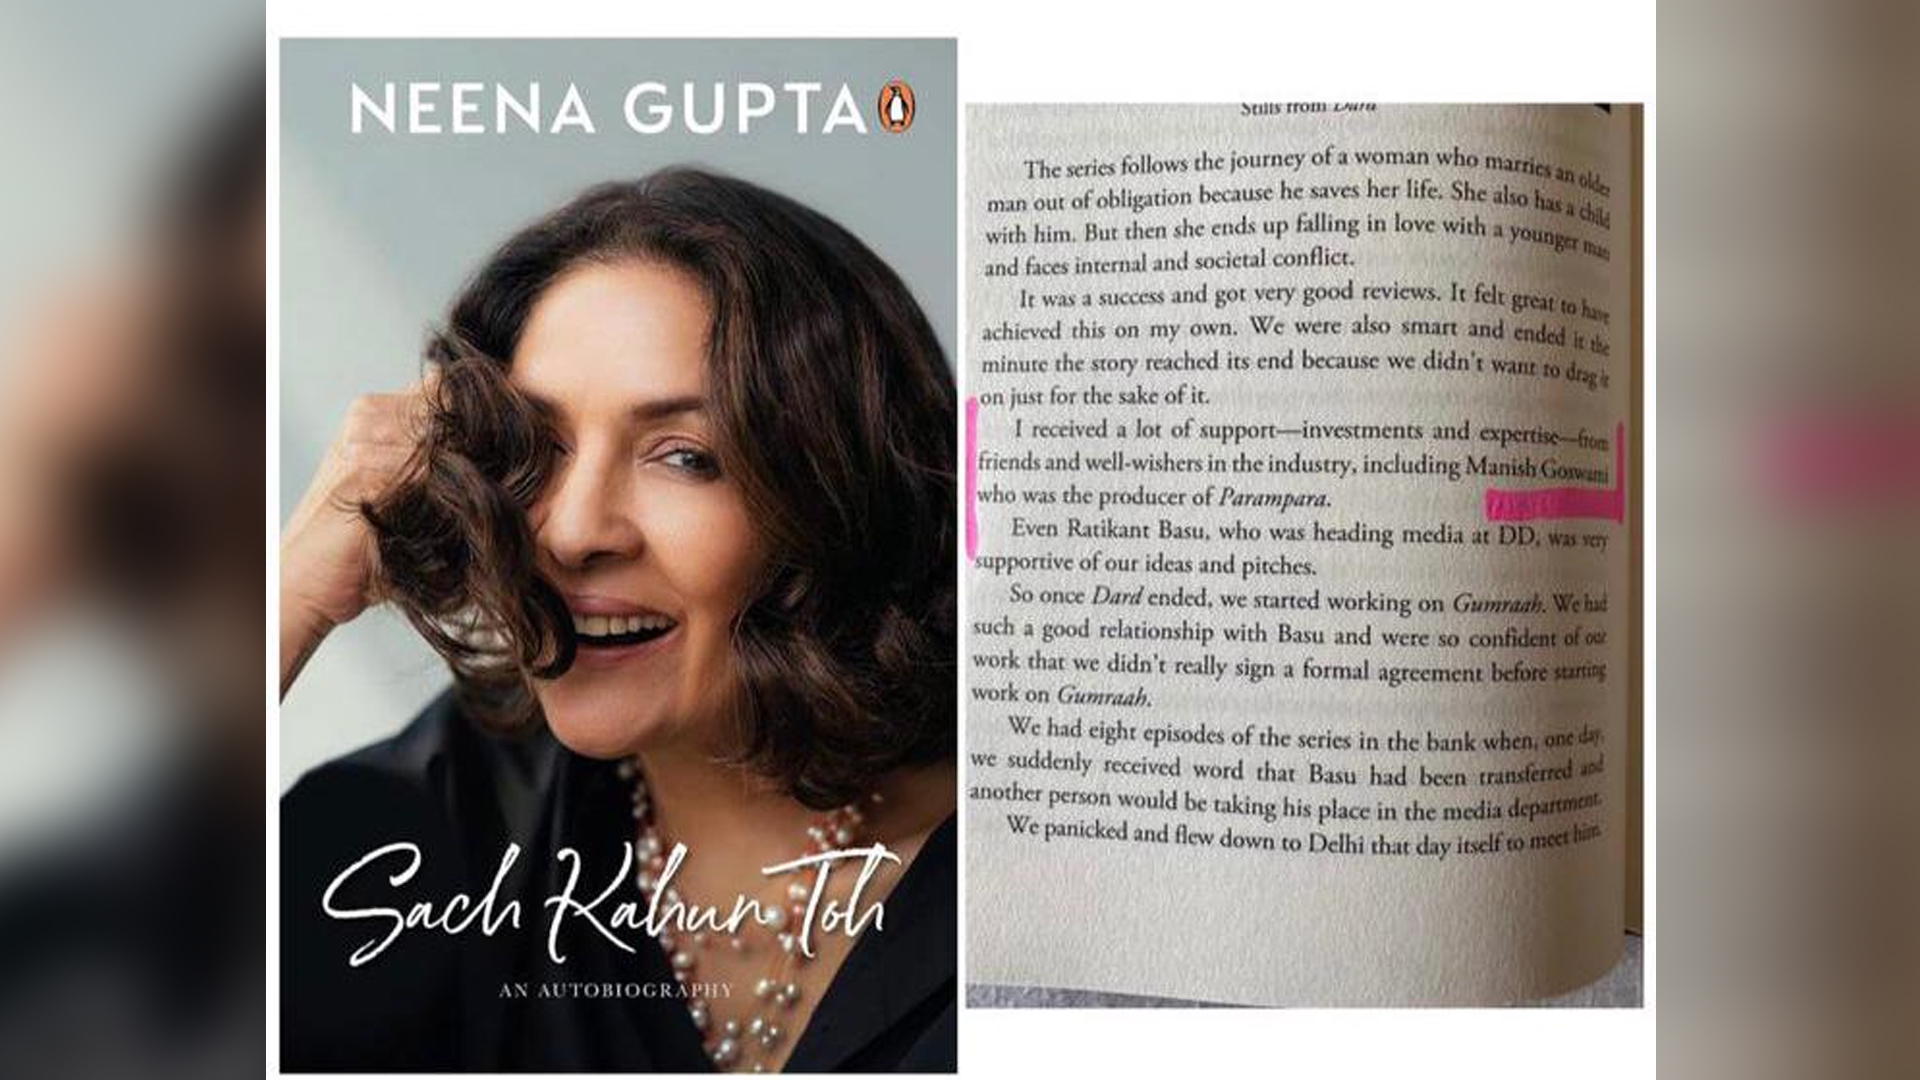 Actor Neena Gupta recently launched her autobiography ‘Sach Kahu Toh’ and fondly mentions Producer Manish Goswami recalling her television acting journey.